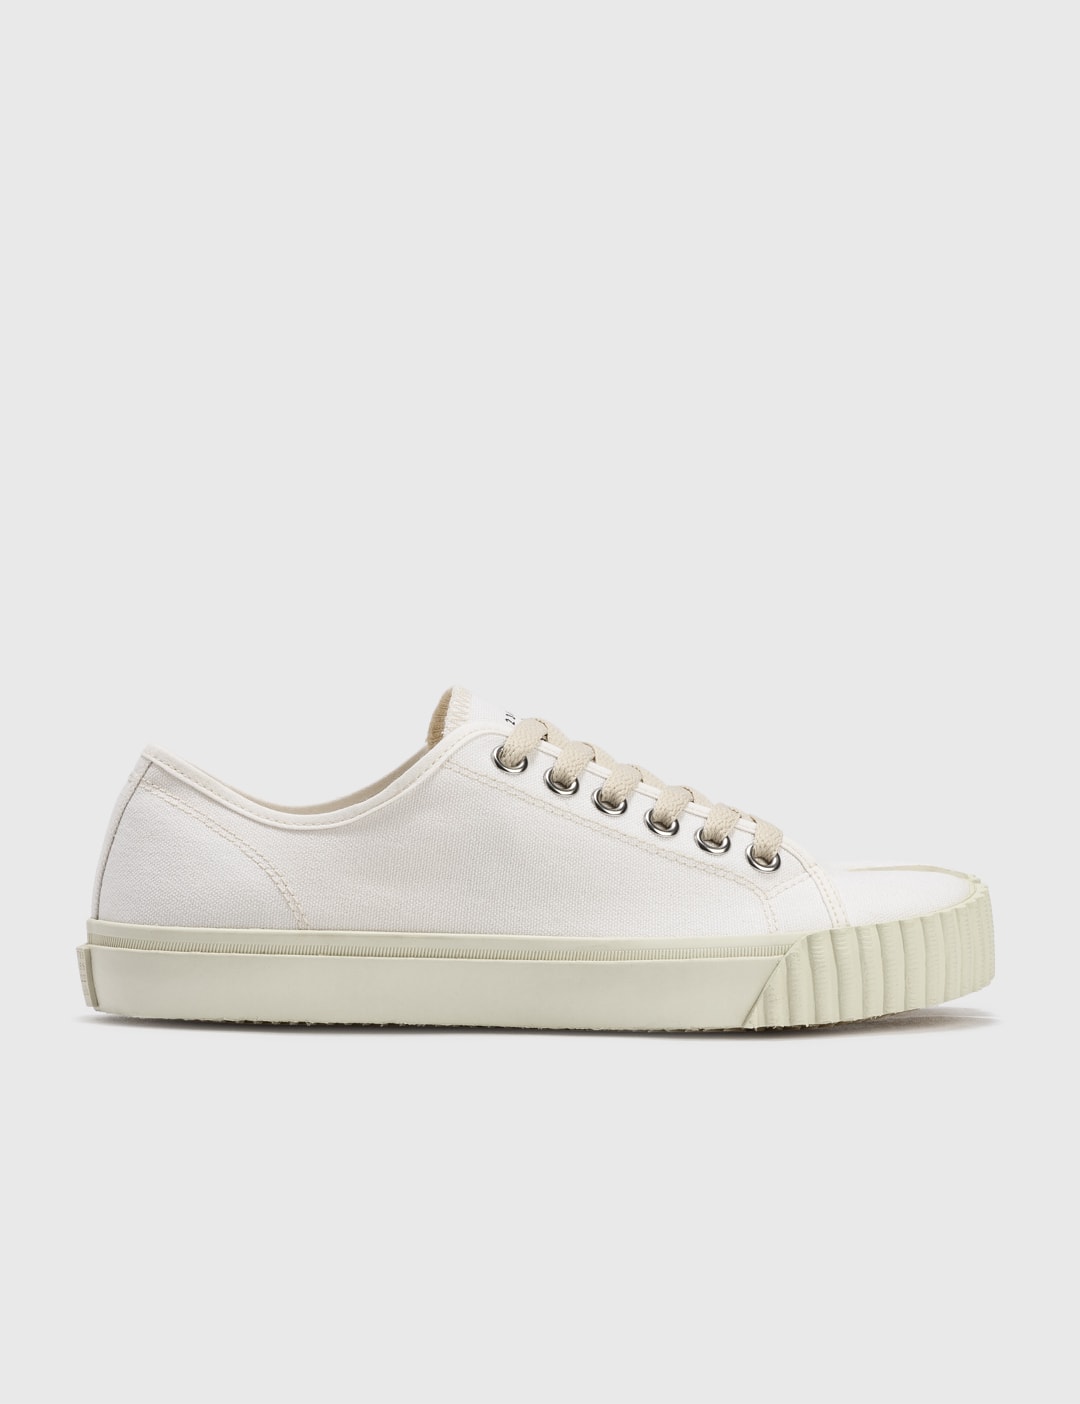 Tabi Canvas Sneakers Placeholder Image